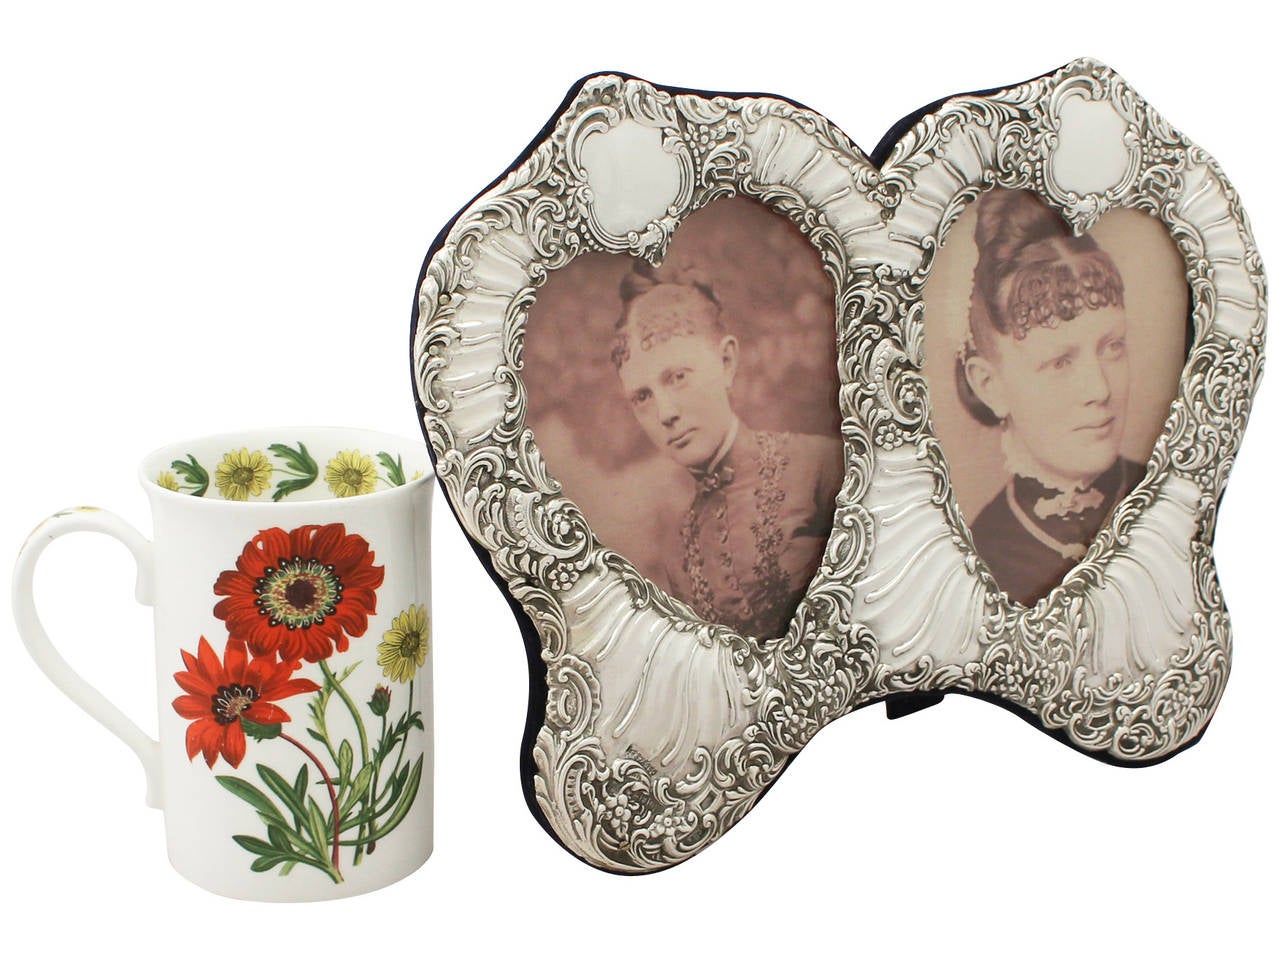 An exceptional, fine and impressive antique Victorian sterling silver double heart shaped photograph frame; an addition to our ornamental silverware collection.

This exceptional antique Victorian sterling silver photograph frame has a double